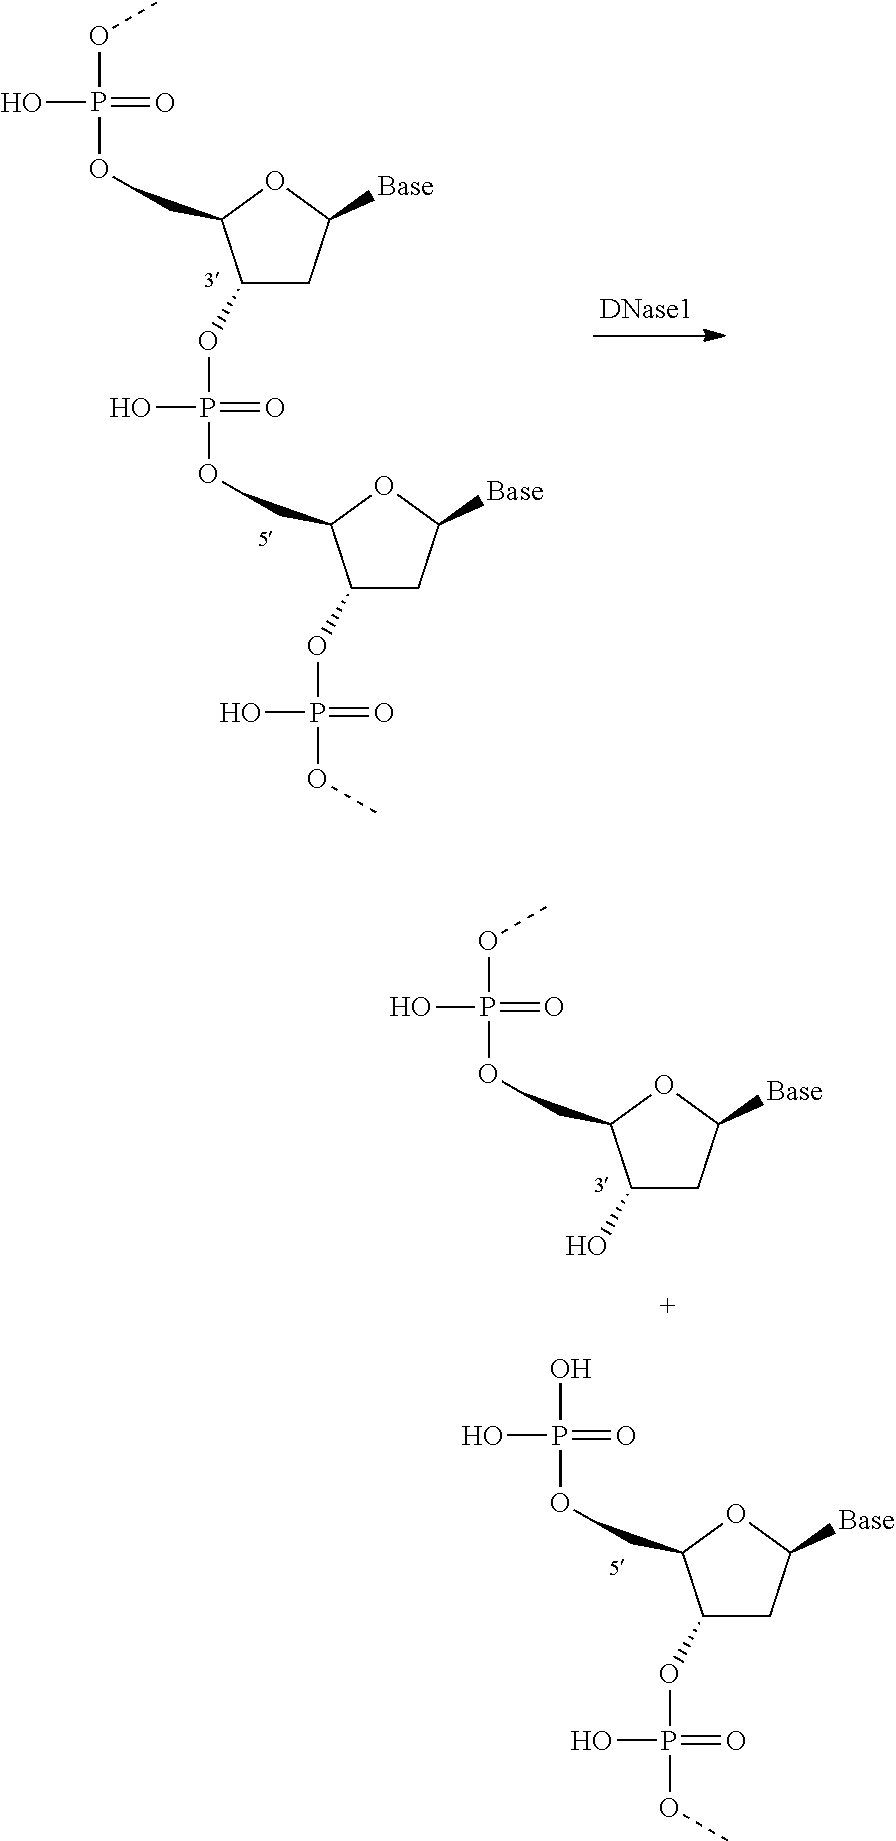 Cleaning compositions including nuclease enzyme and amines